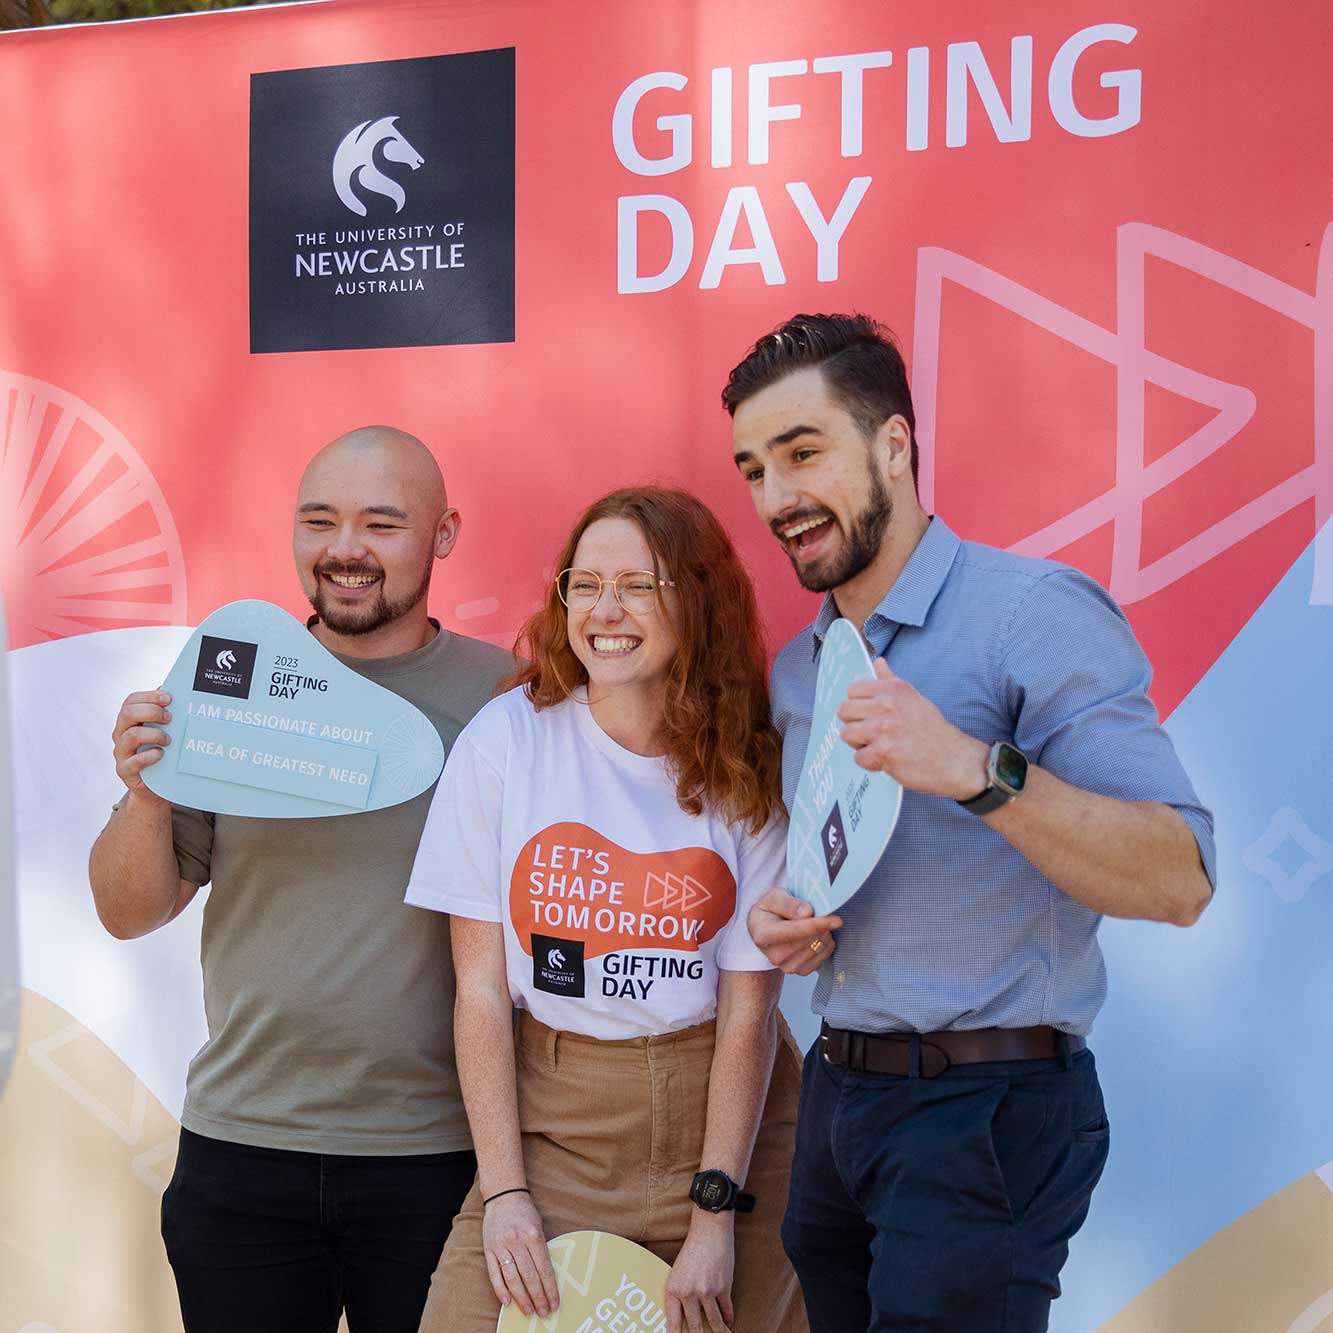 Image of three people in front of a photo booth screen, holding placards for Gifting Day